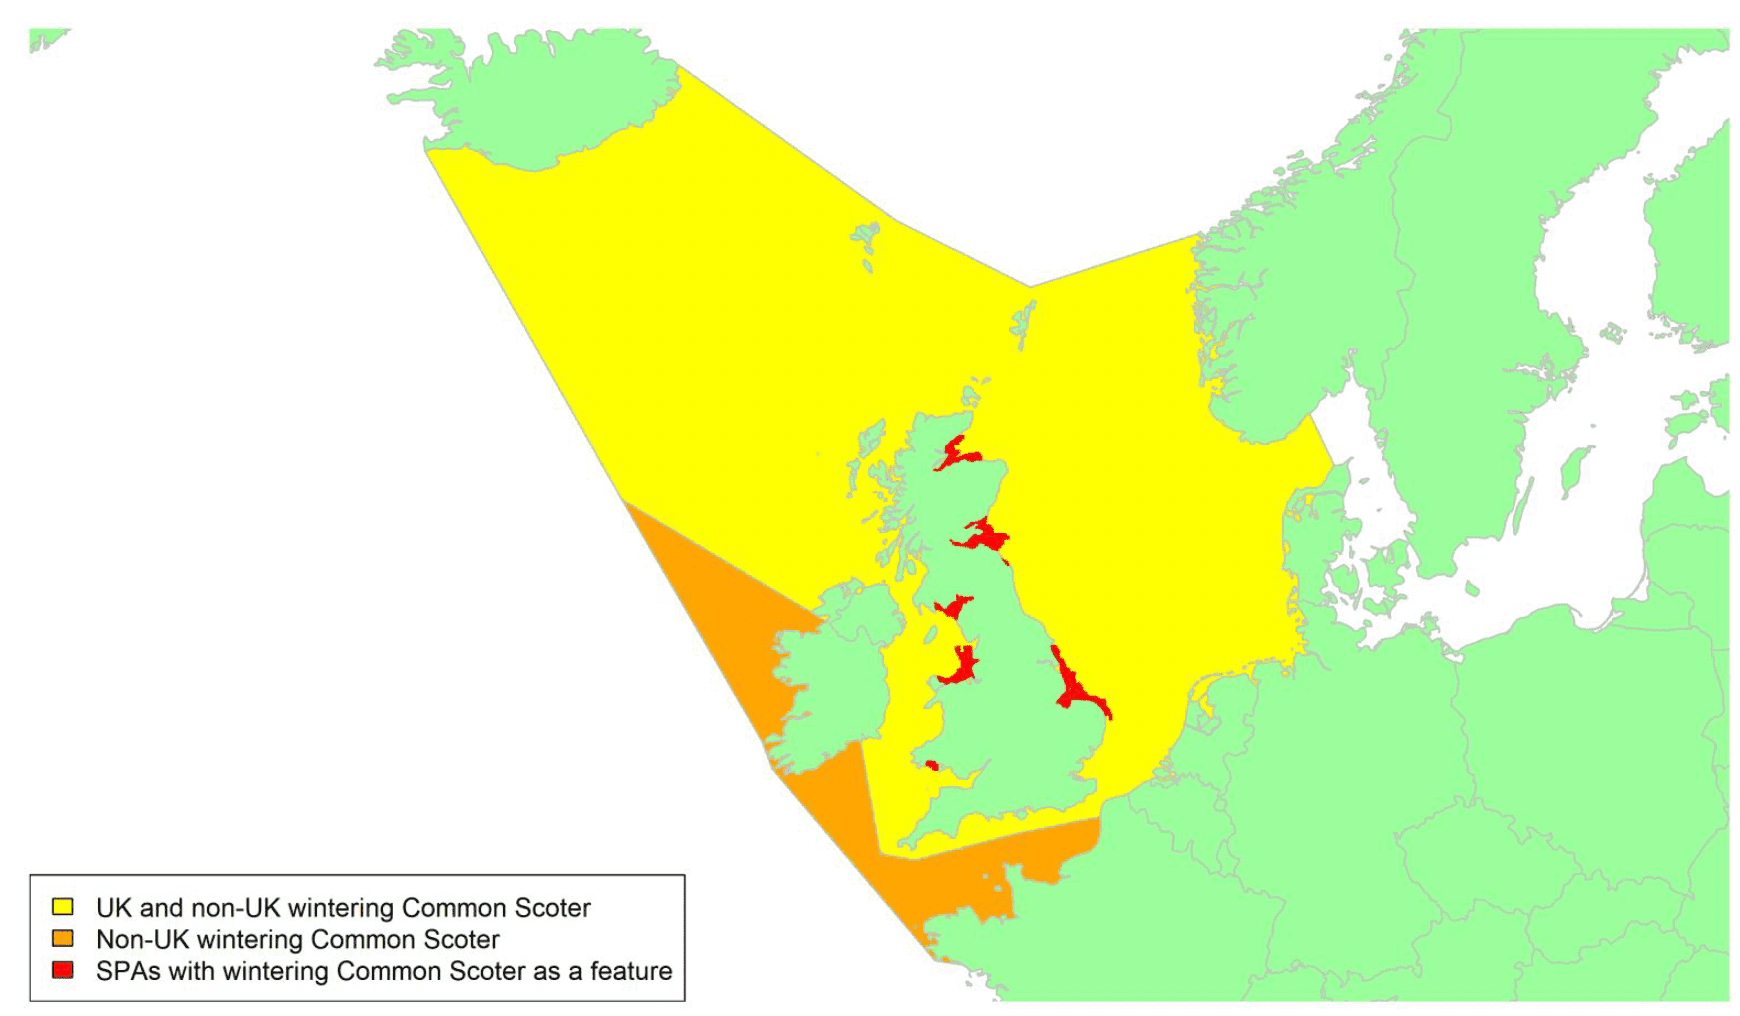 Map of North West Europe showing migratory routes and SPAs within the UK for wintering Common Scoter as described in the text below.